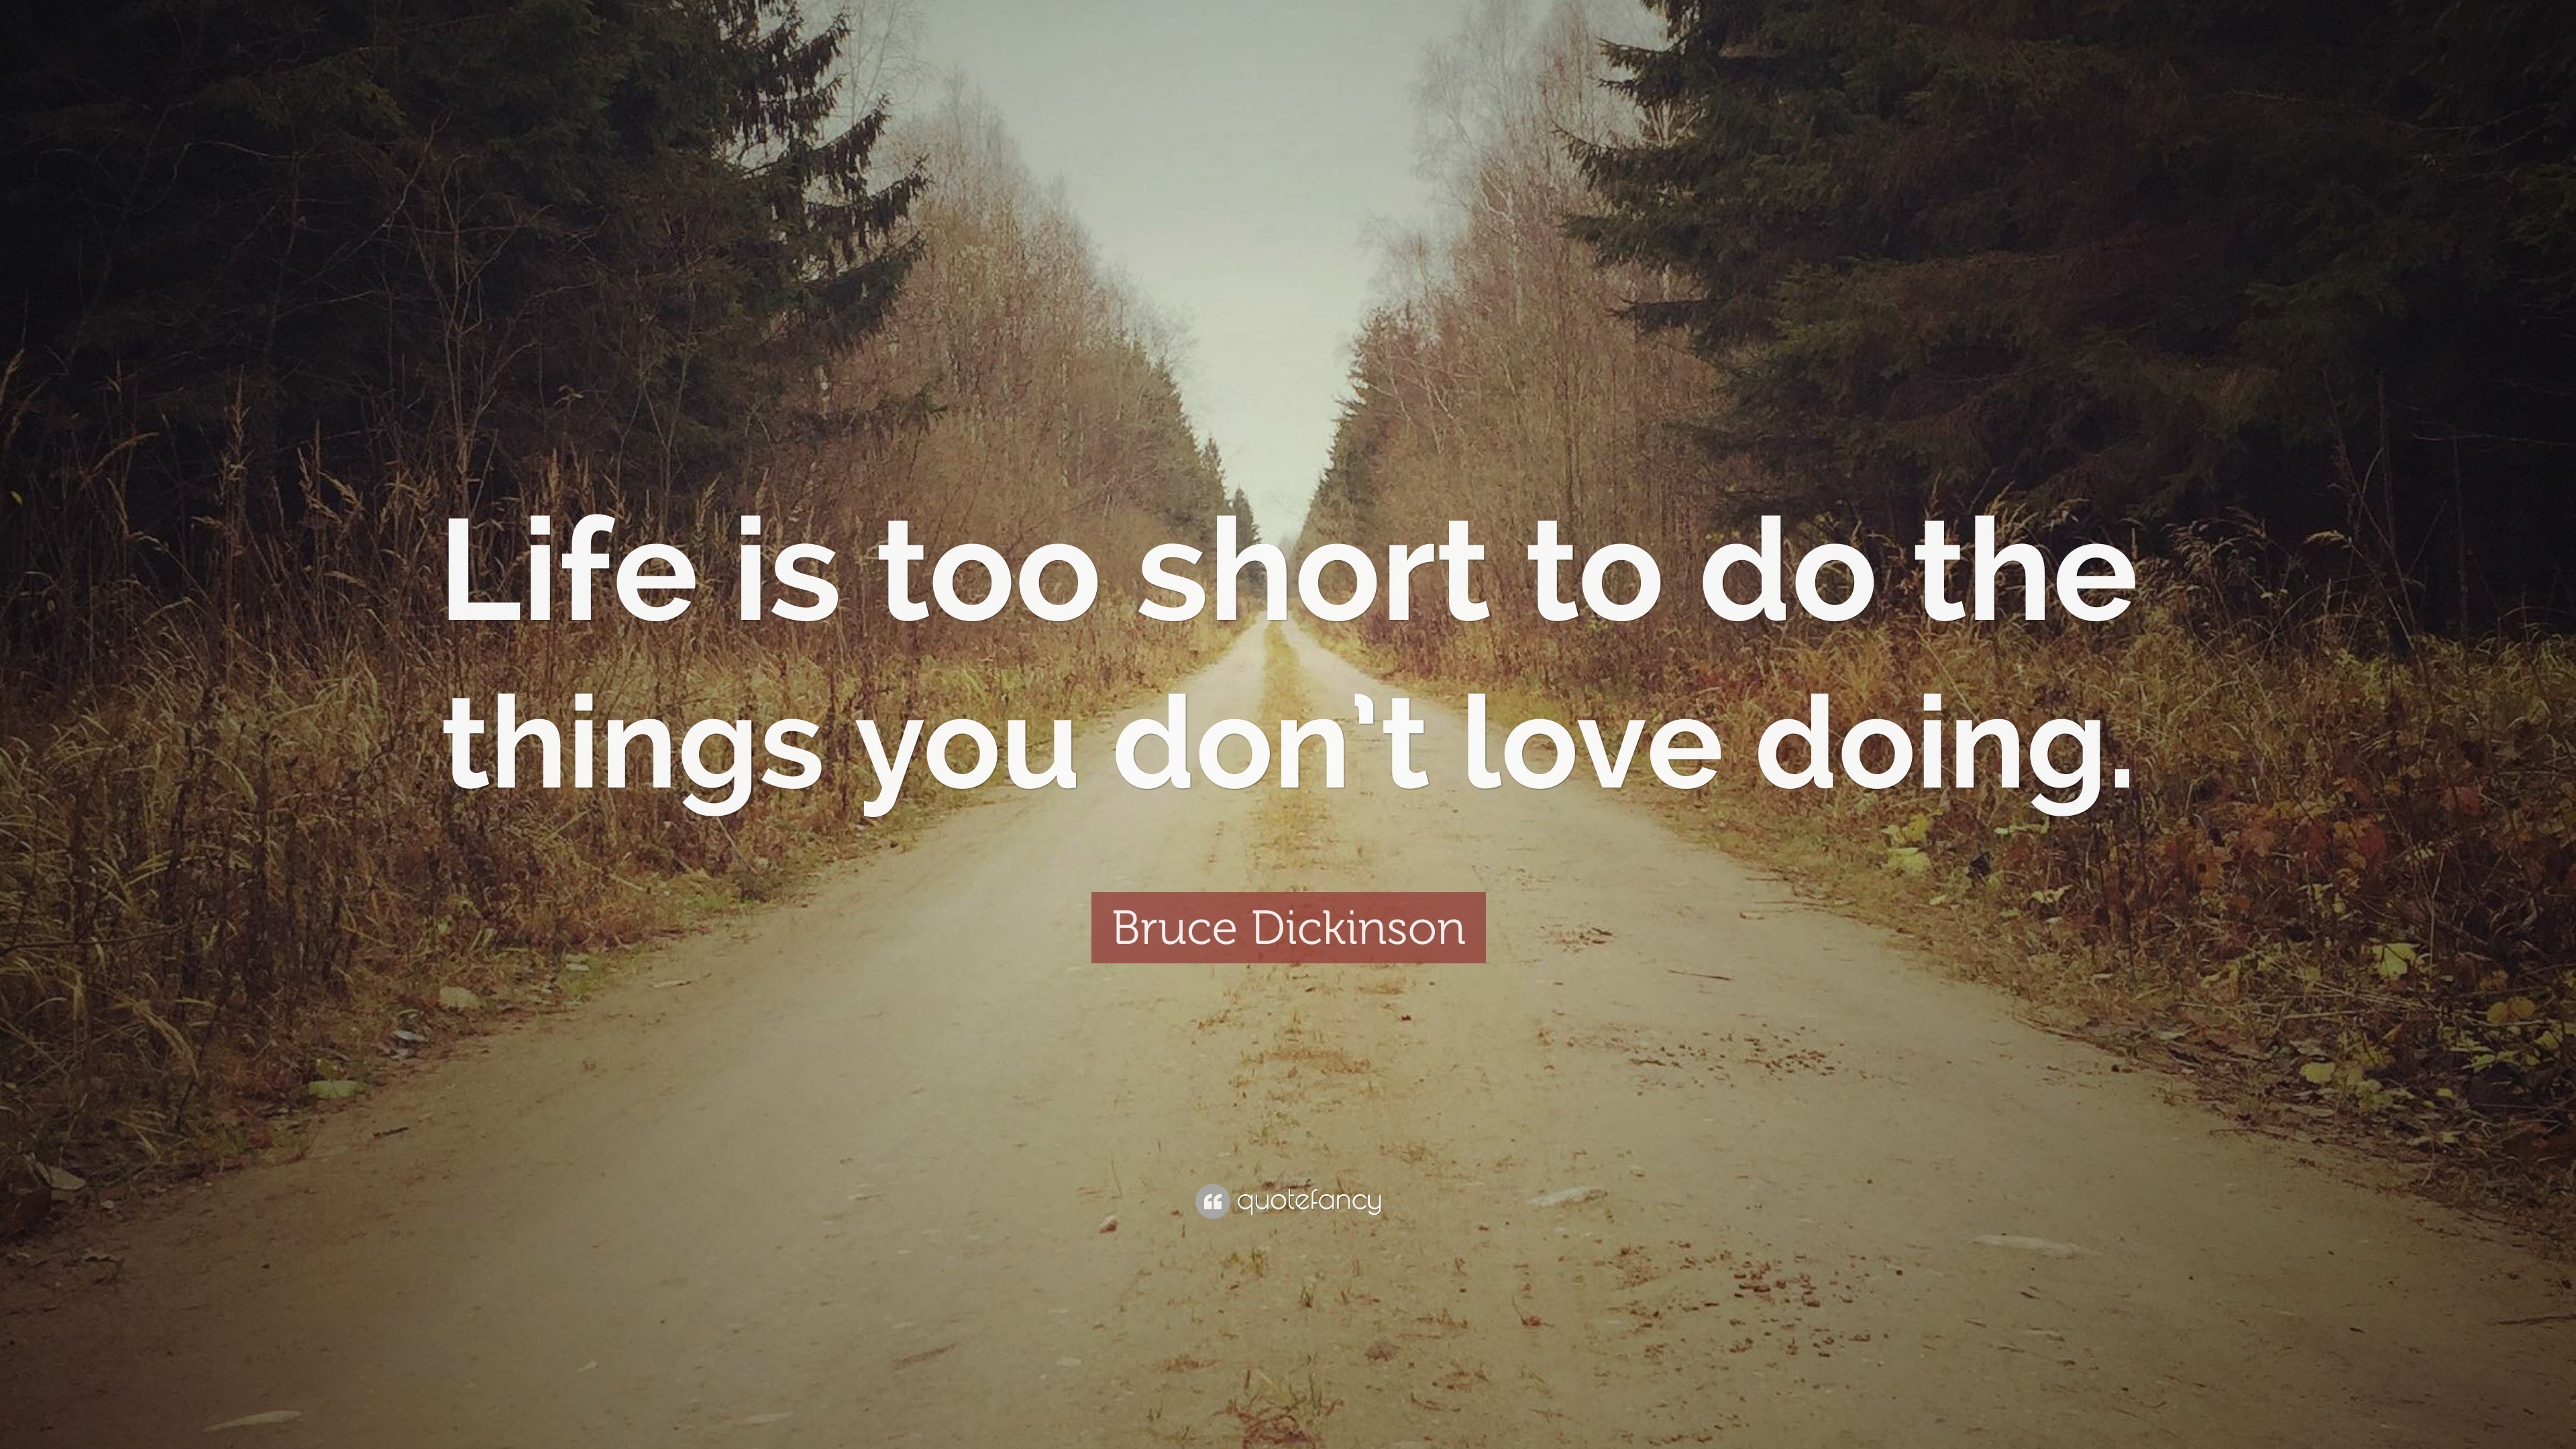 Bruce Dickinson Quote: “Life is too short to do the things you don’t ...